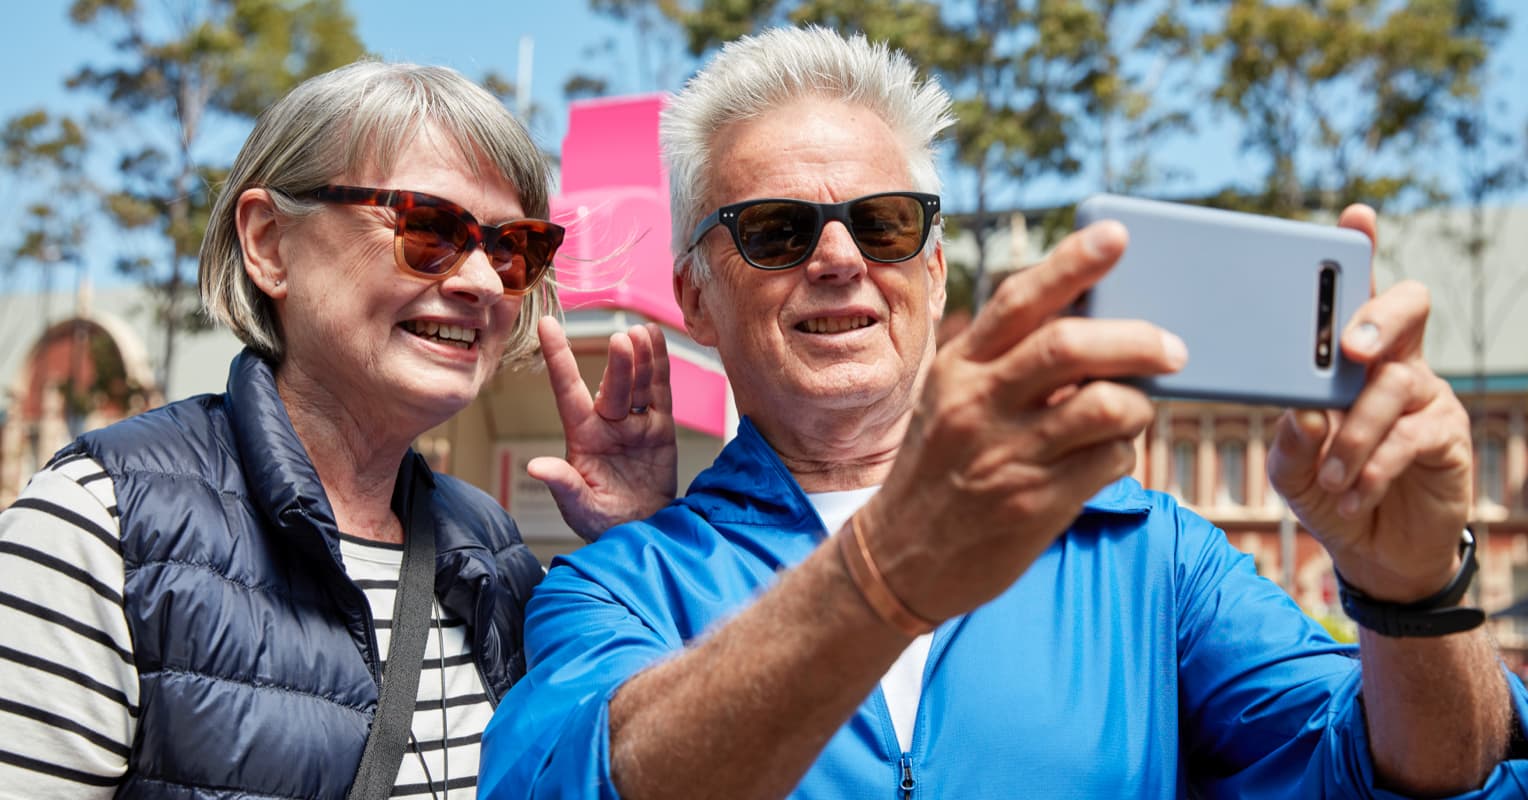 Elderly couple outdoors taking a photo with their phone